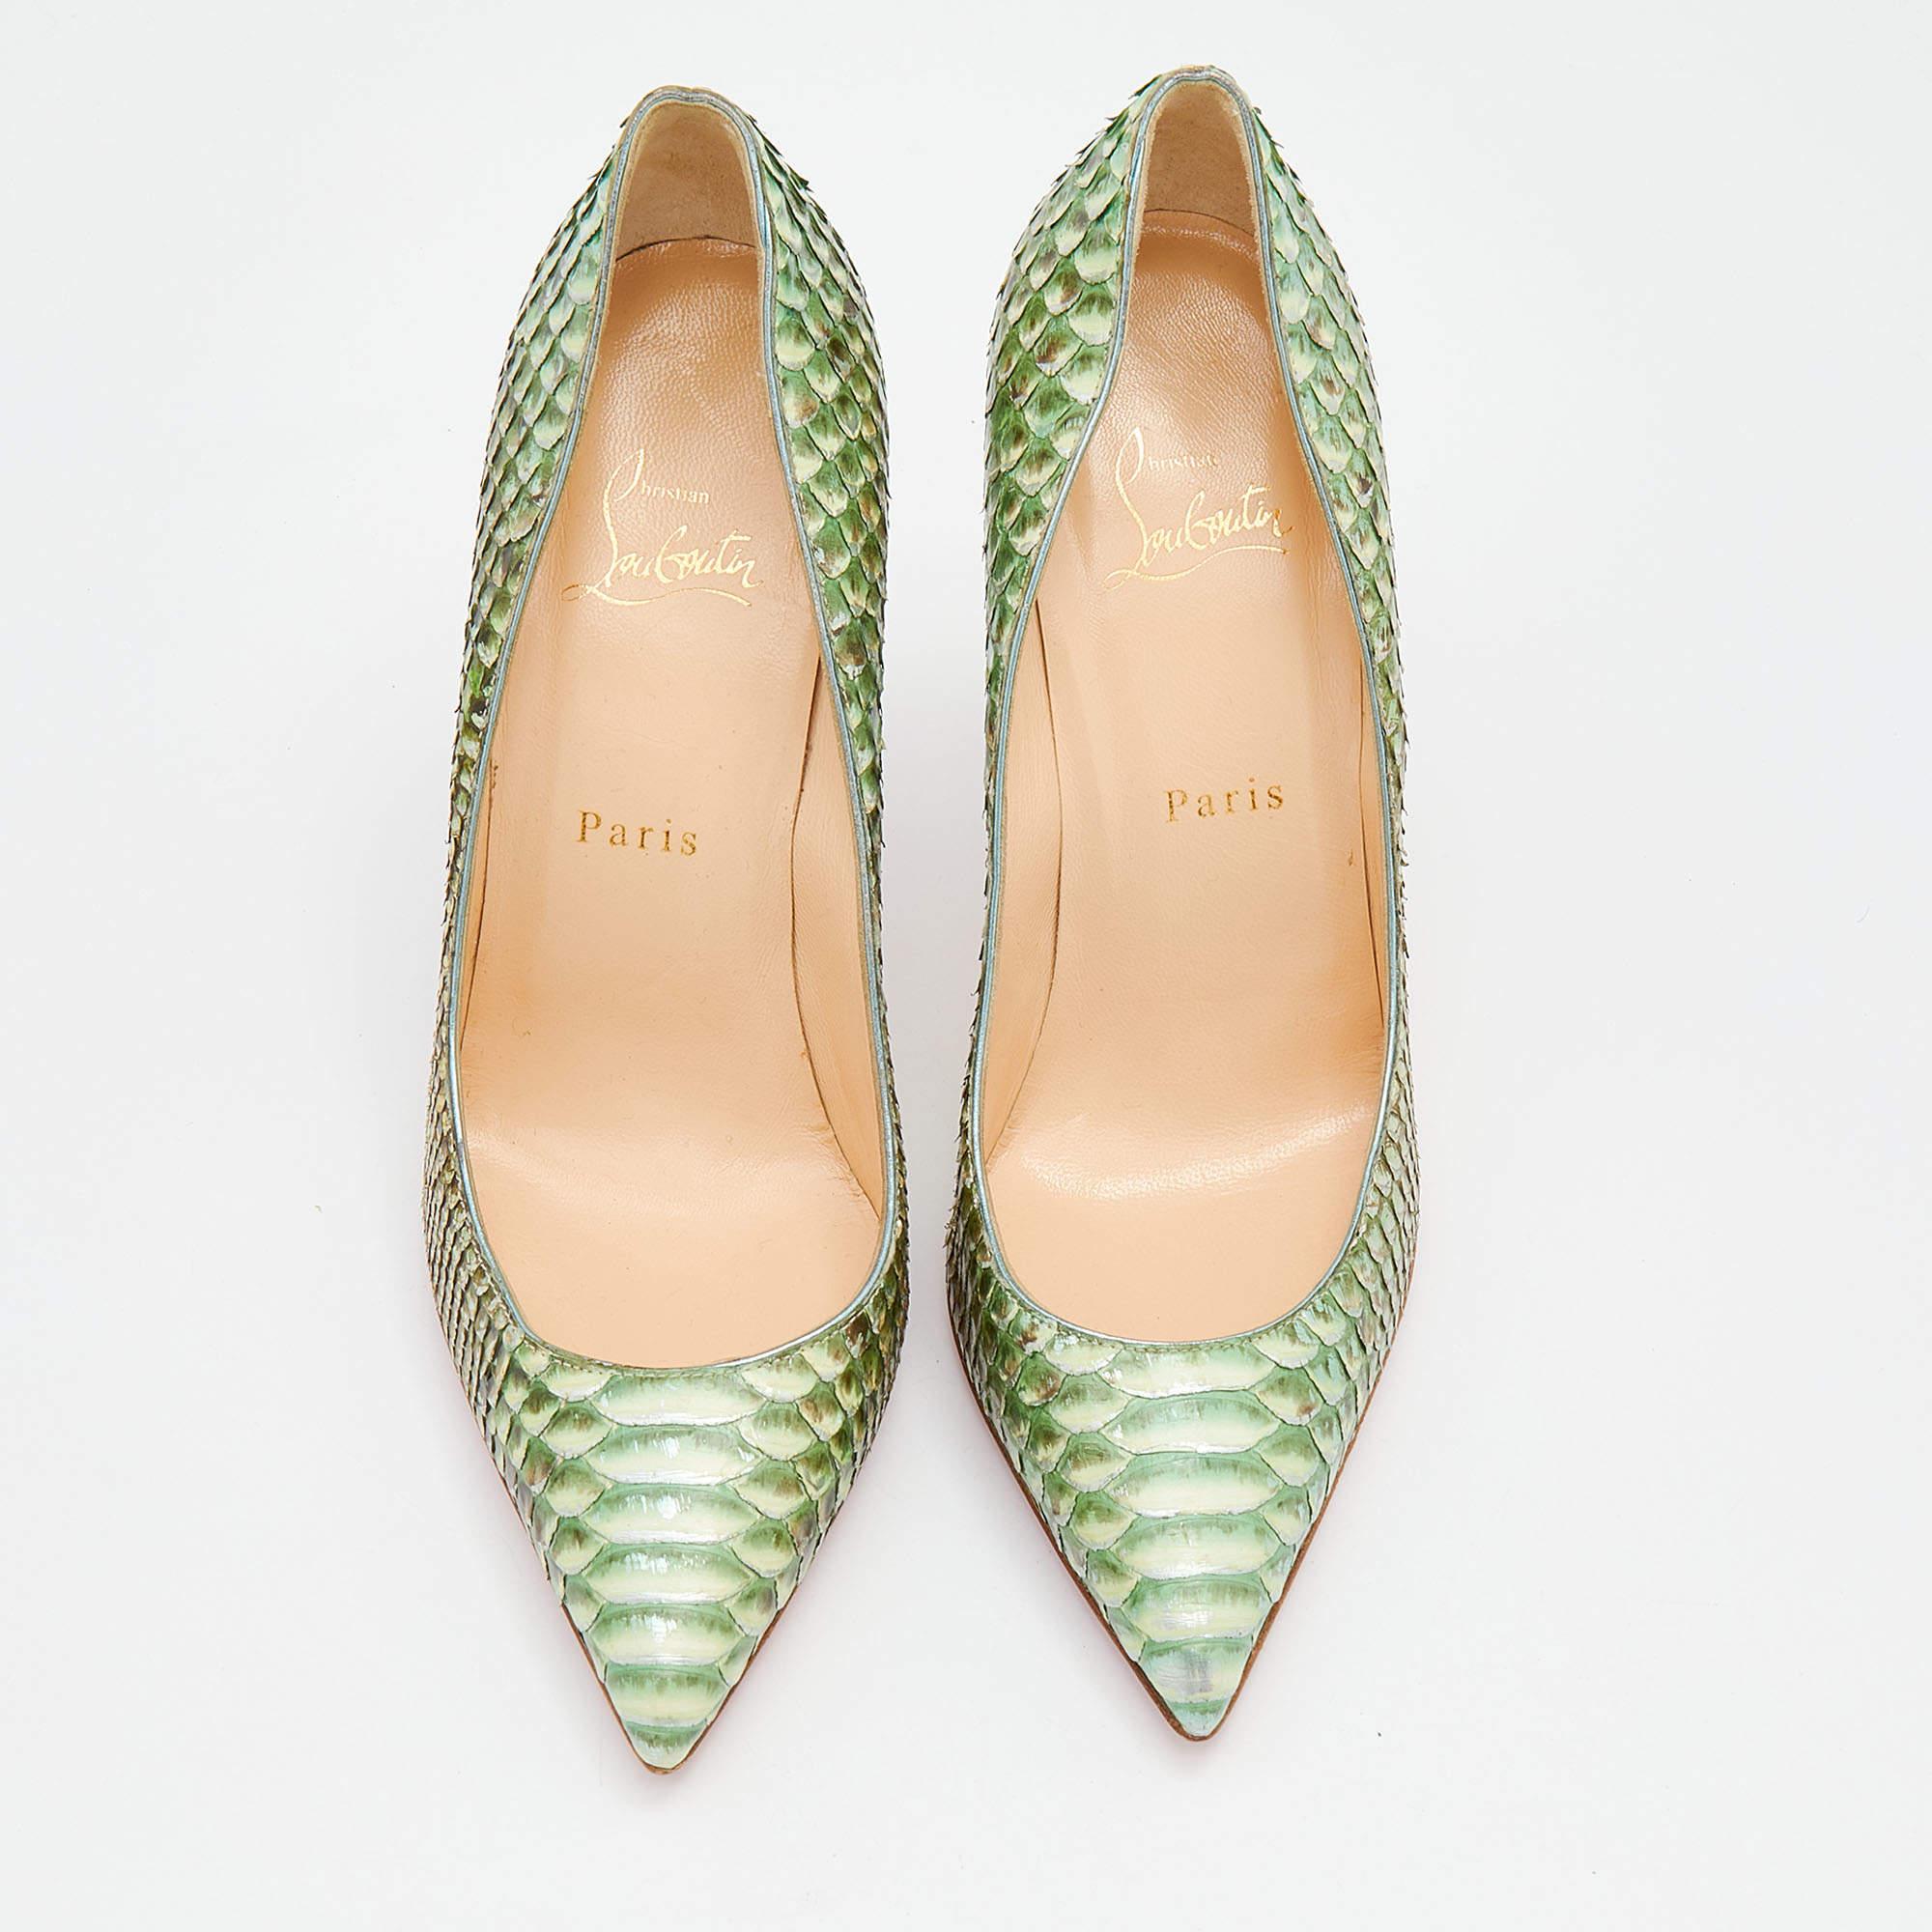 Named after English model Kate Moss, this pair of Christian Louboutin So Kate pumps reflects elegance and sophistication in every step. Proving the brand's expertise in the art of stiletto making, it has been diligently crafted from python leather